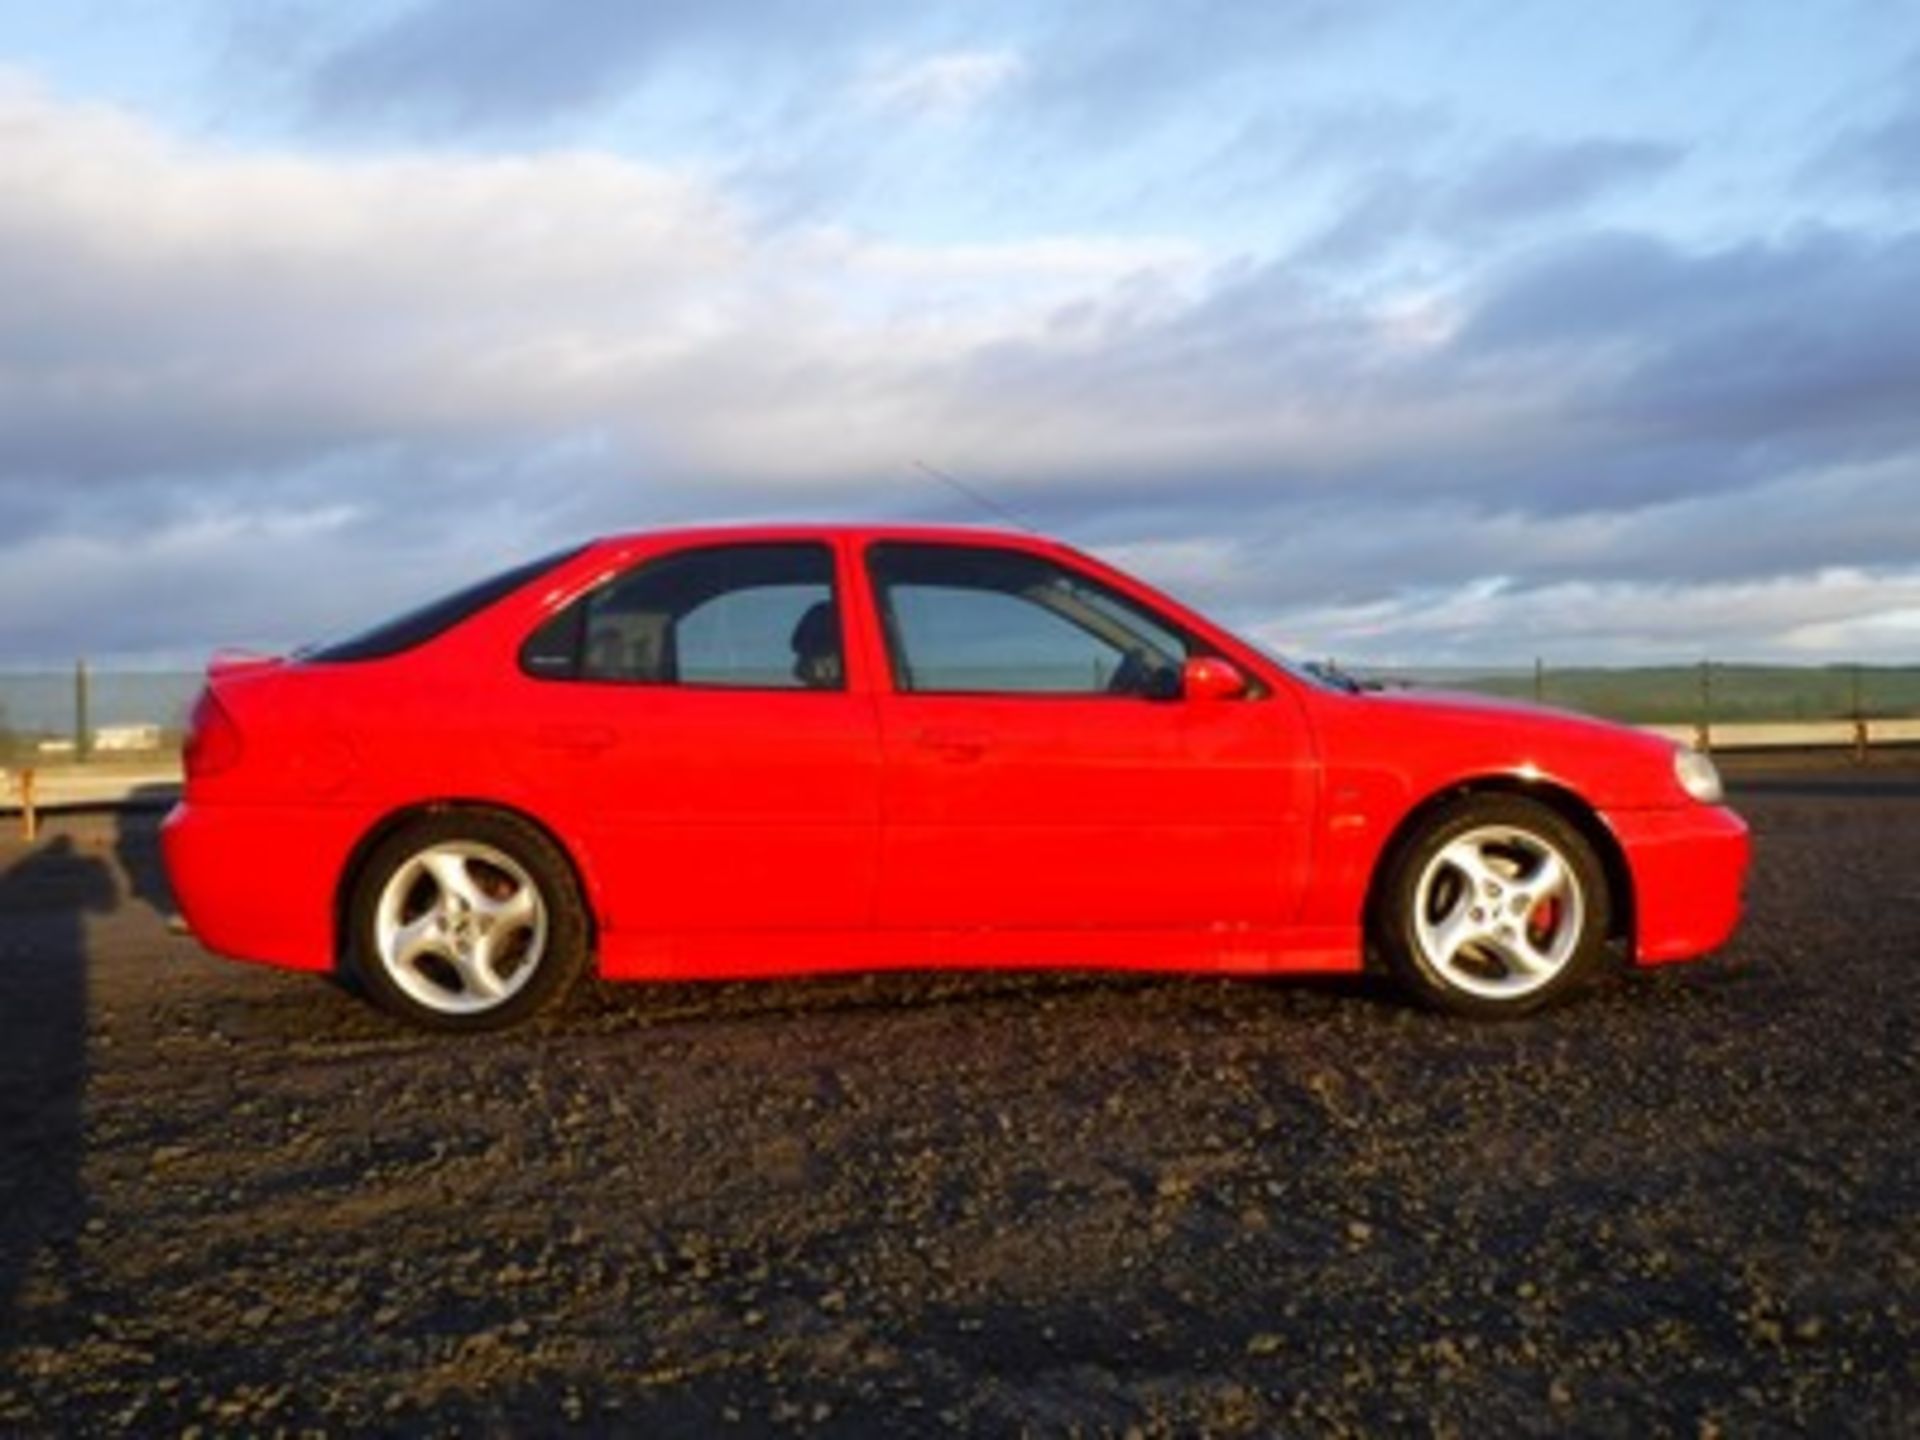 FORD MONDEO ST 24 V6 - 2497cc - Image 11 of 24